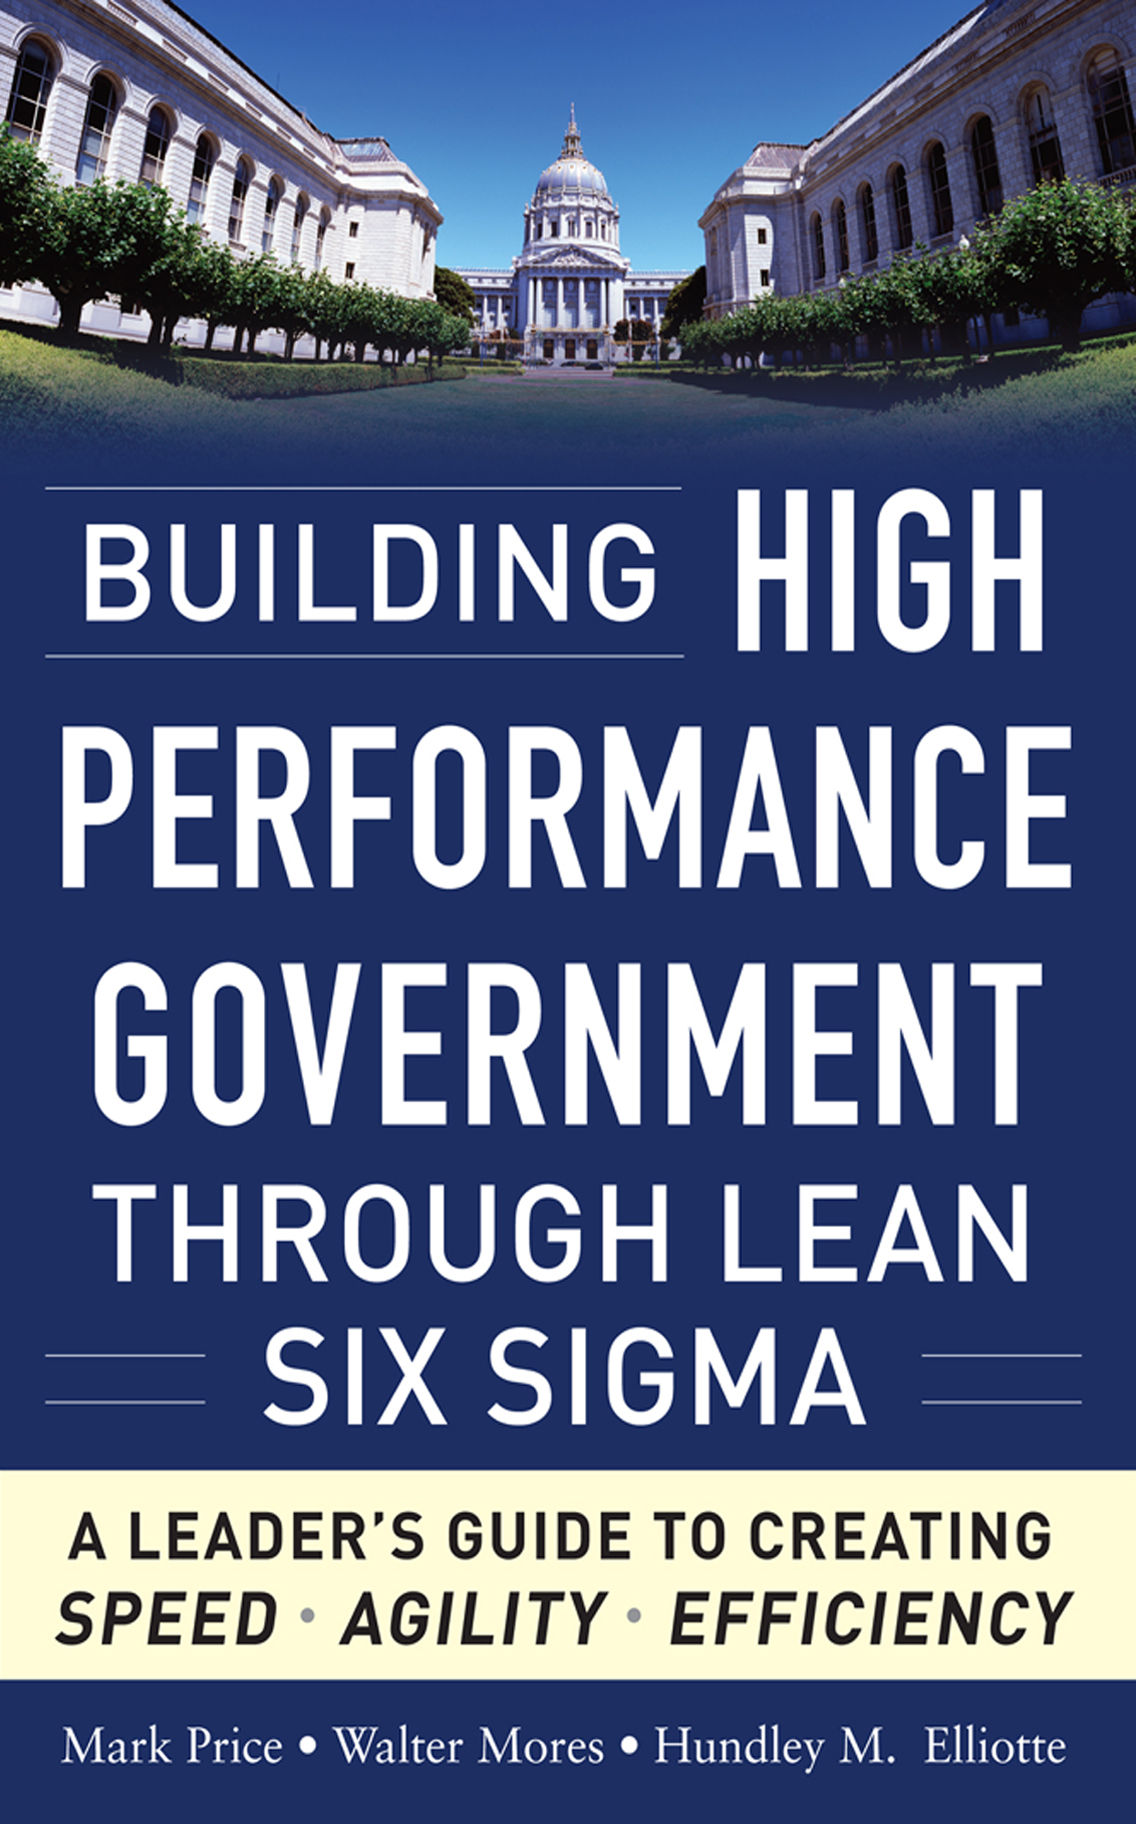 Building High Performance Government Through Lean Six Sigma